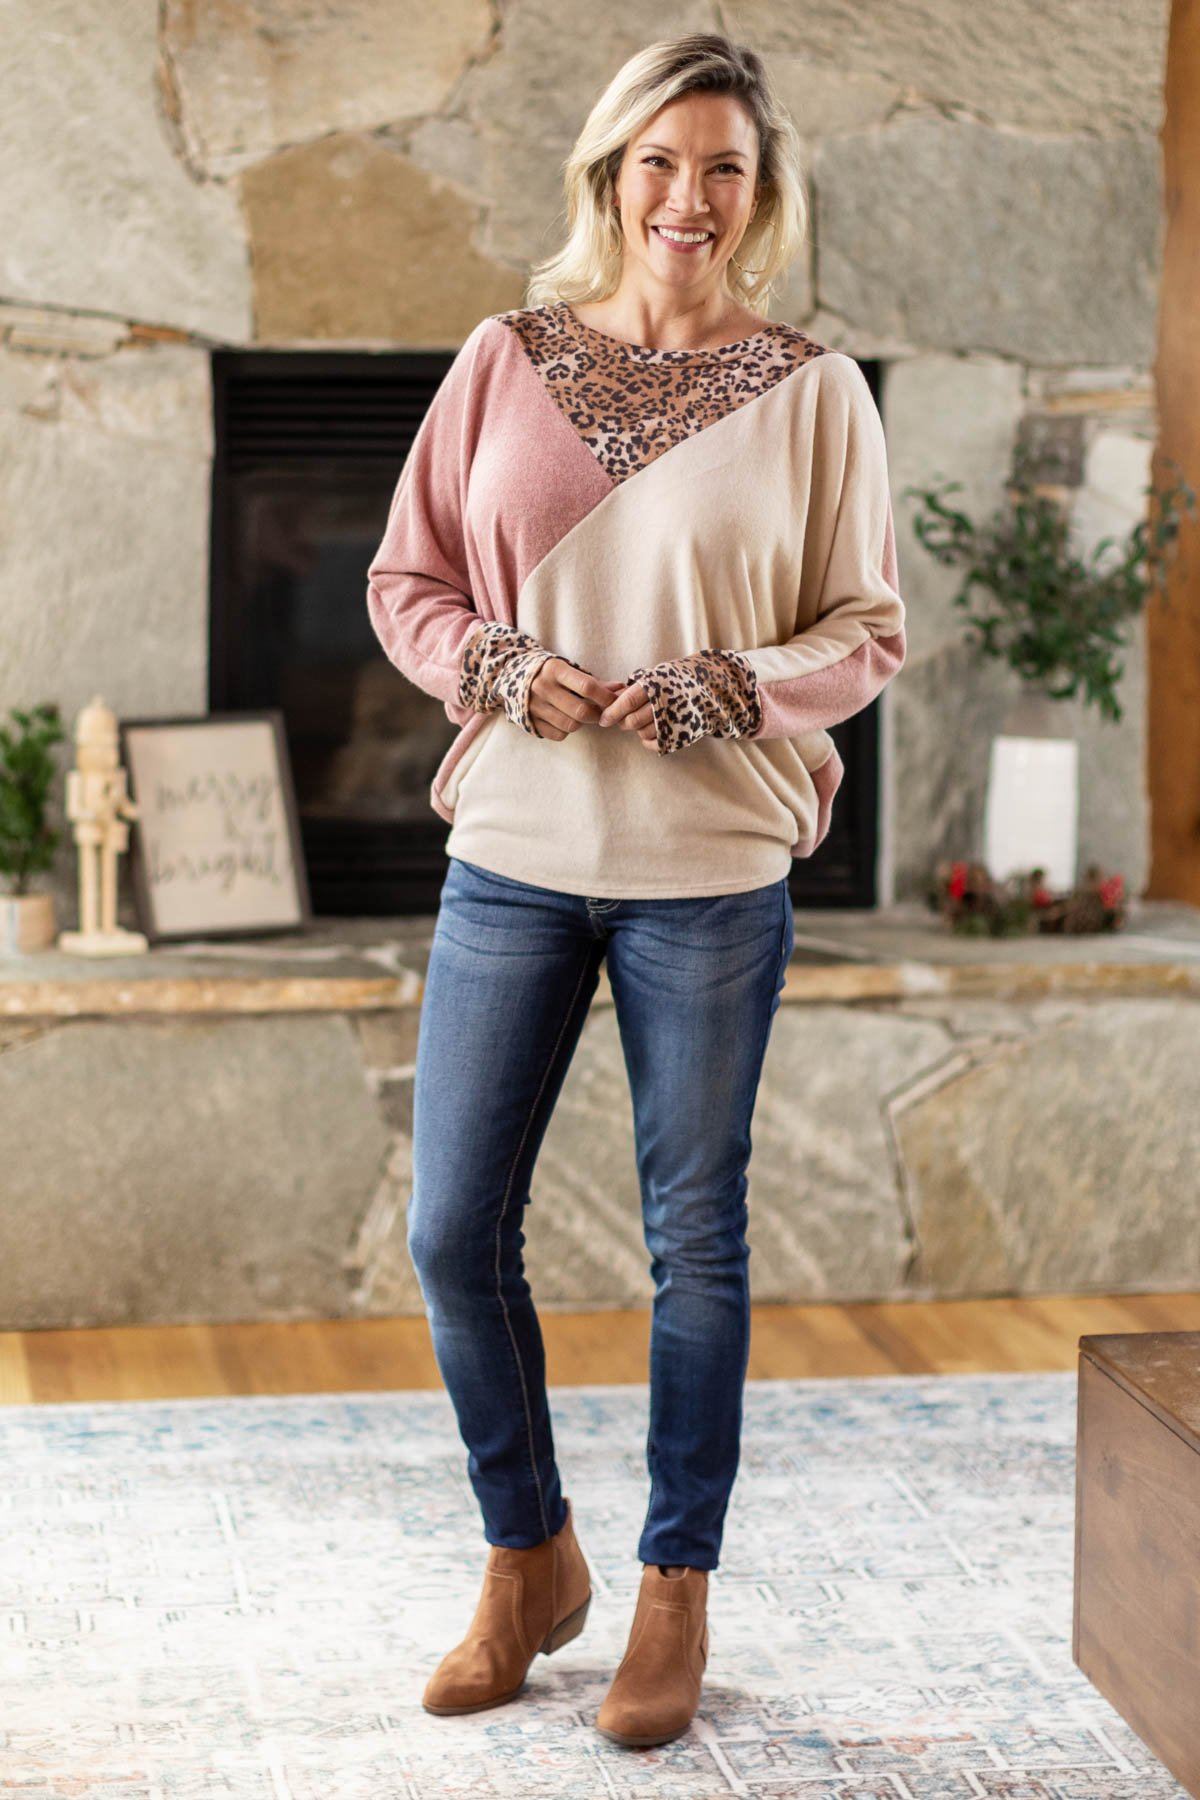 Tan and Mauve Colorblock Top with Animal Print - Filly Flair